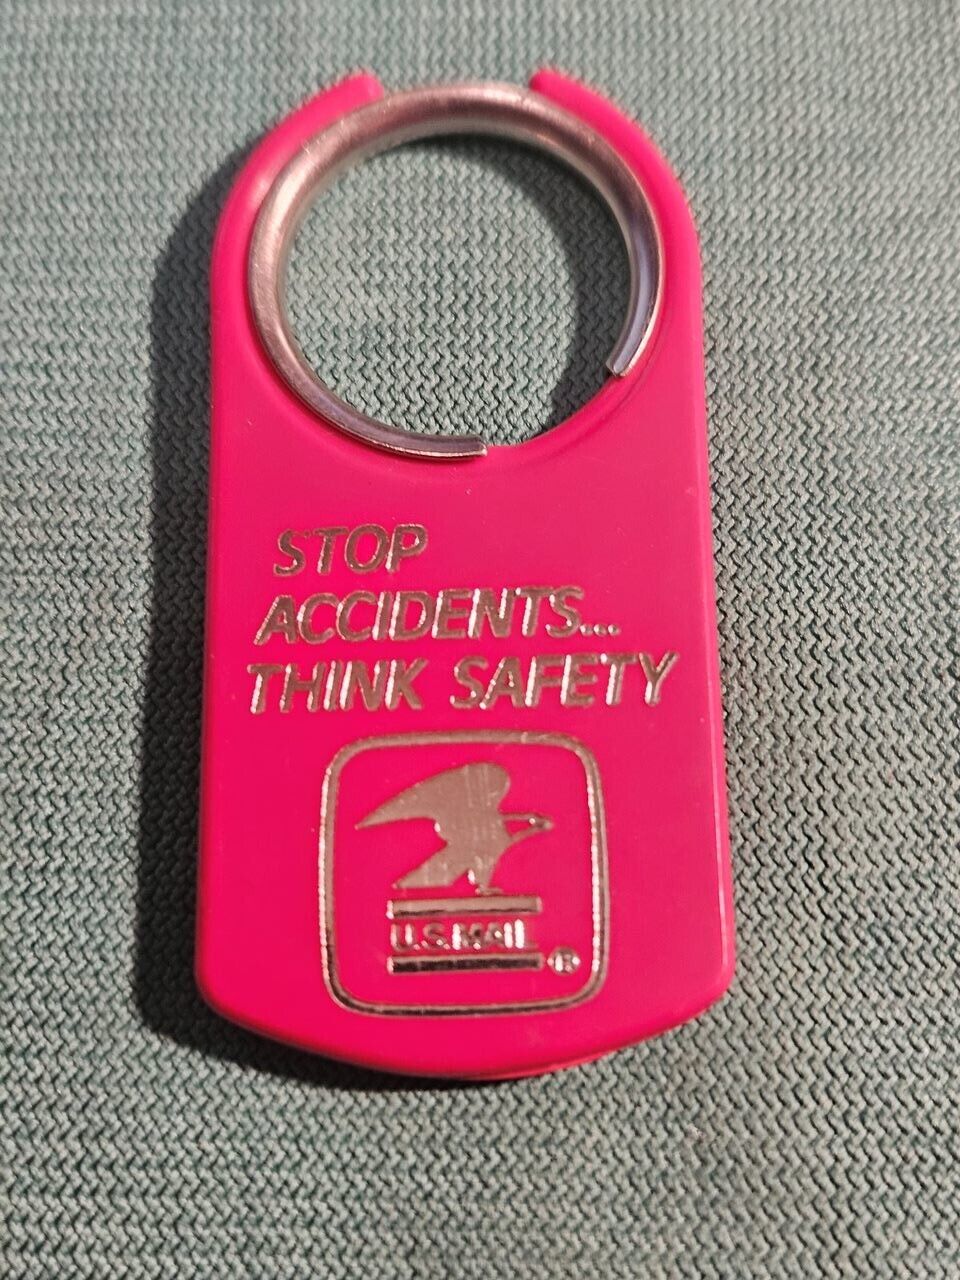 Vintage USPS US Mail UNITED STATES POSTAL Stop Accidents think safety keychain